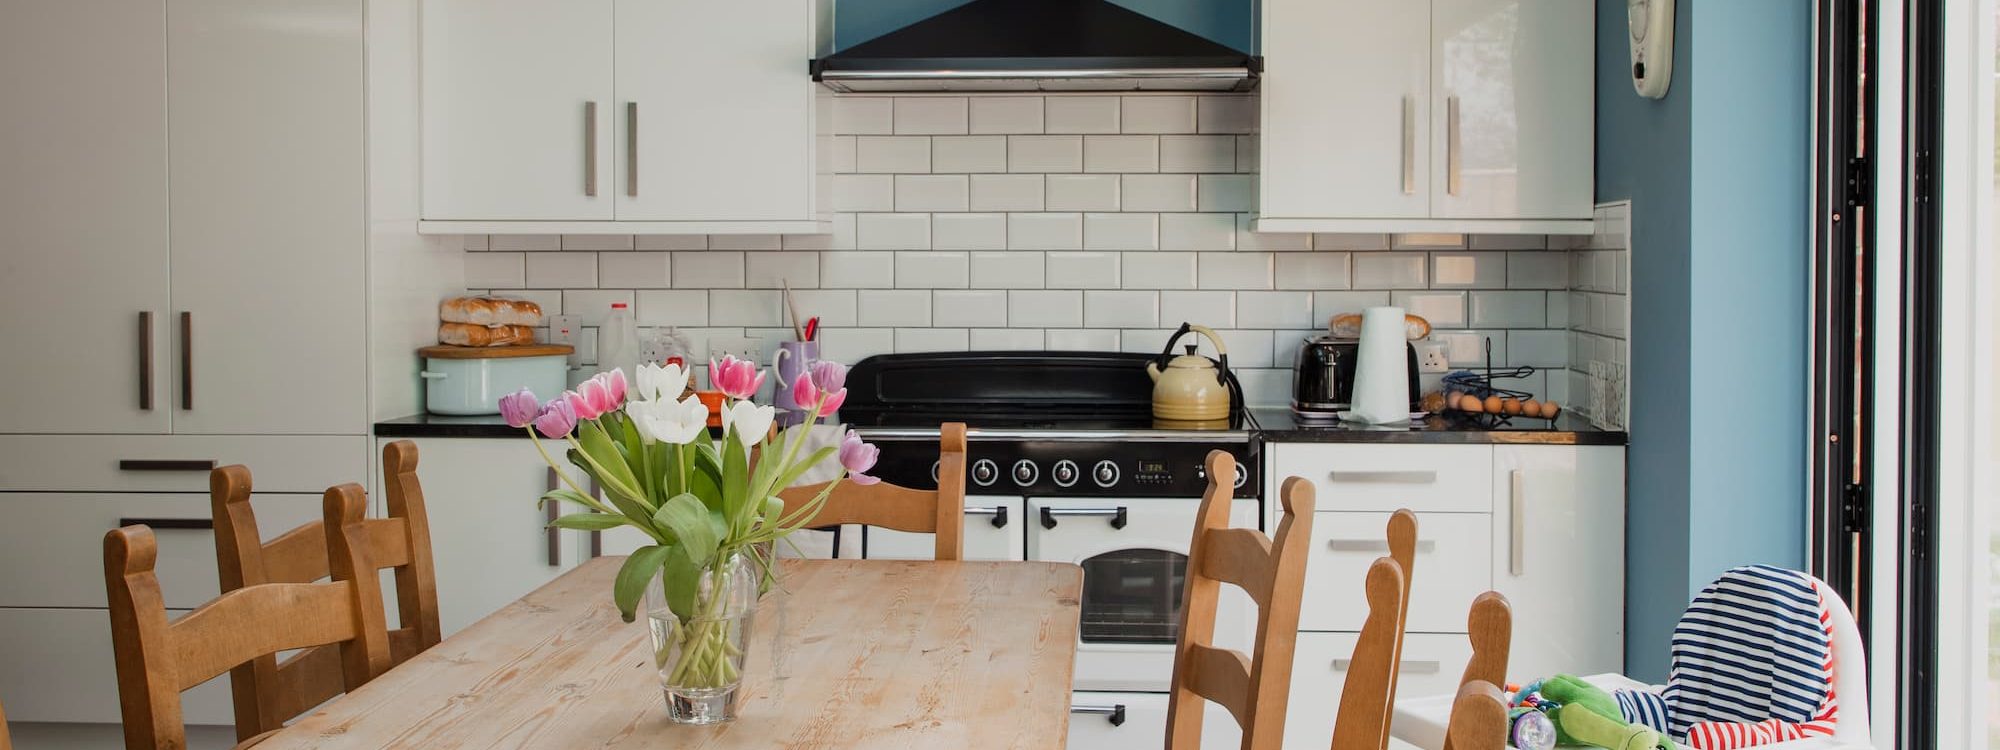 Bright kitchen with flowers on table